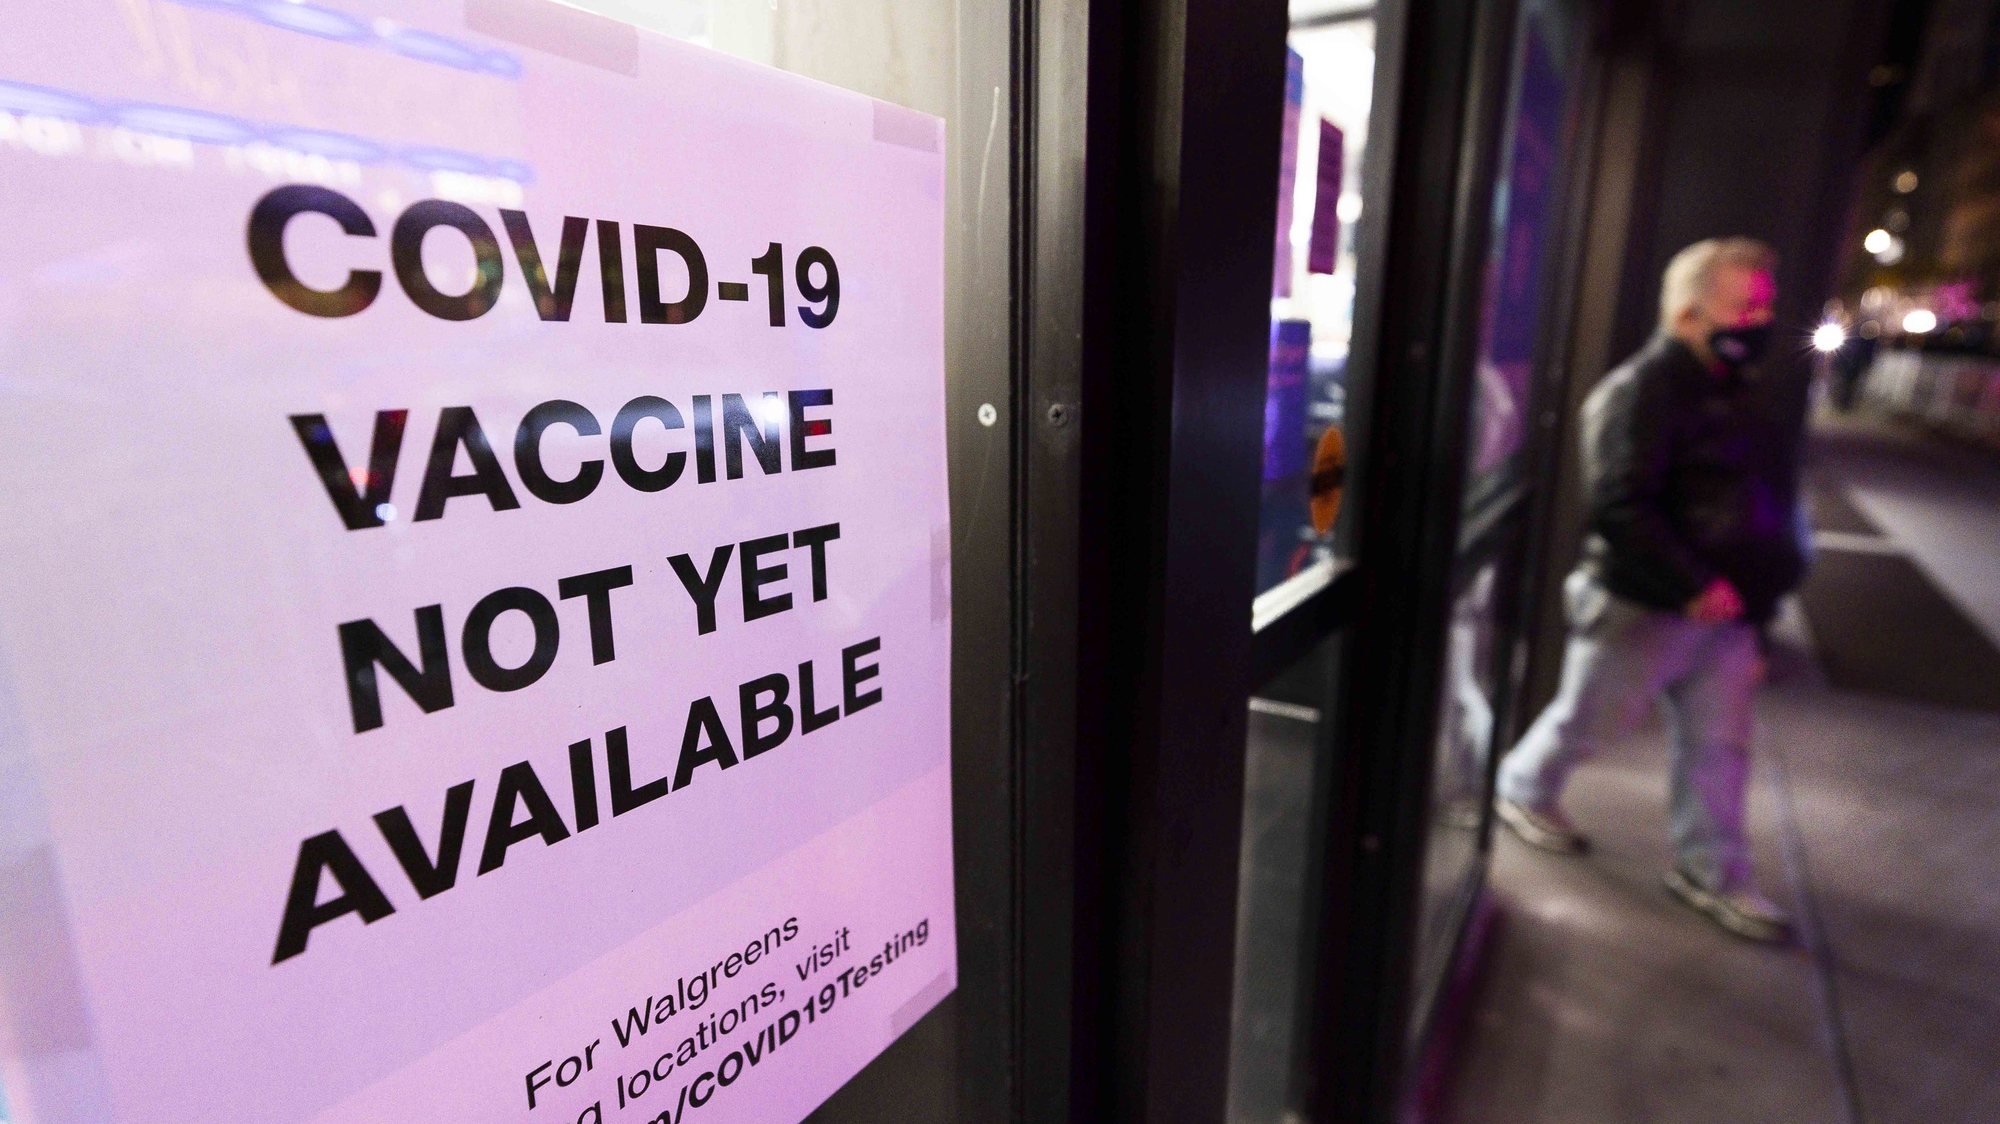 epa08856316 Sign informing customers about COVID-19 vaccine availability hangs on a window at a drug store in New York, USA, 01 December 2020.  EPA/JUSTIN LANE